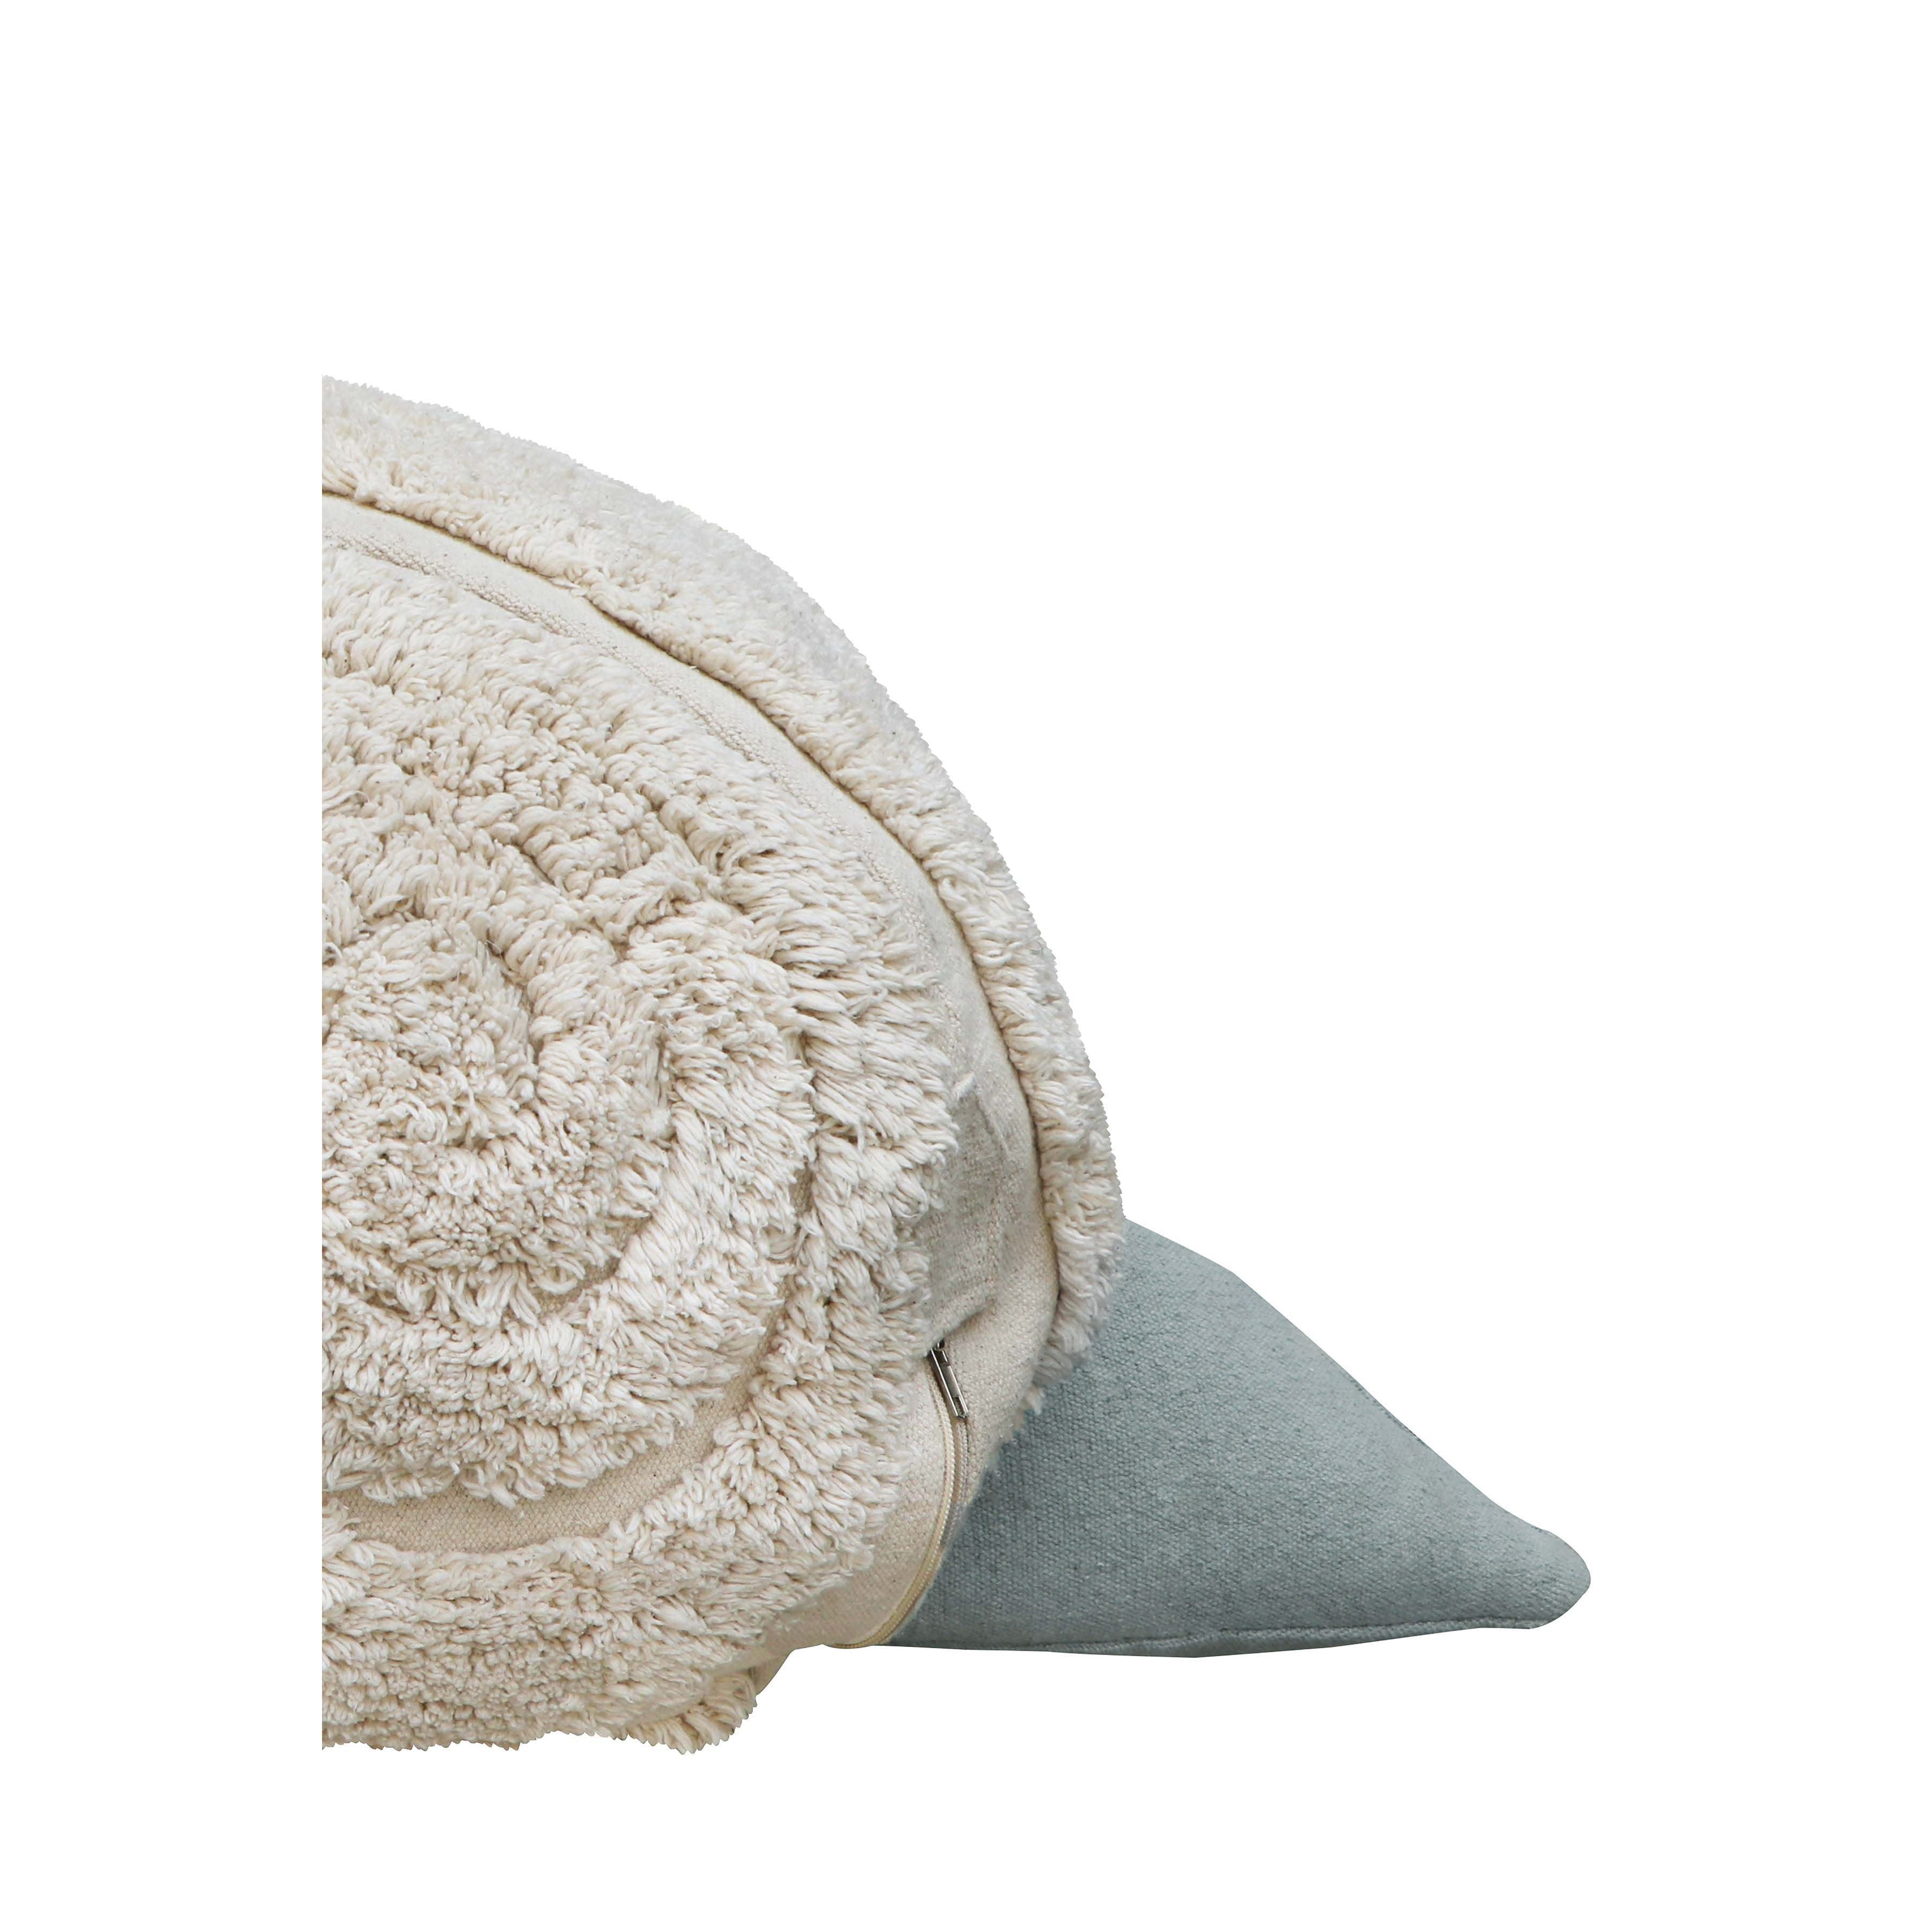 Lorena Canals Fantasy Garden Mr Snail Pouf - Rugs by Roo